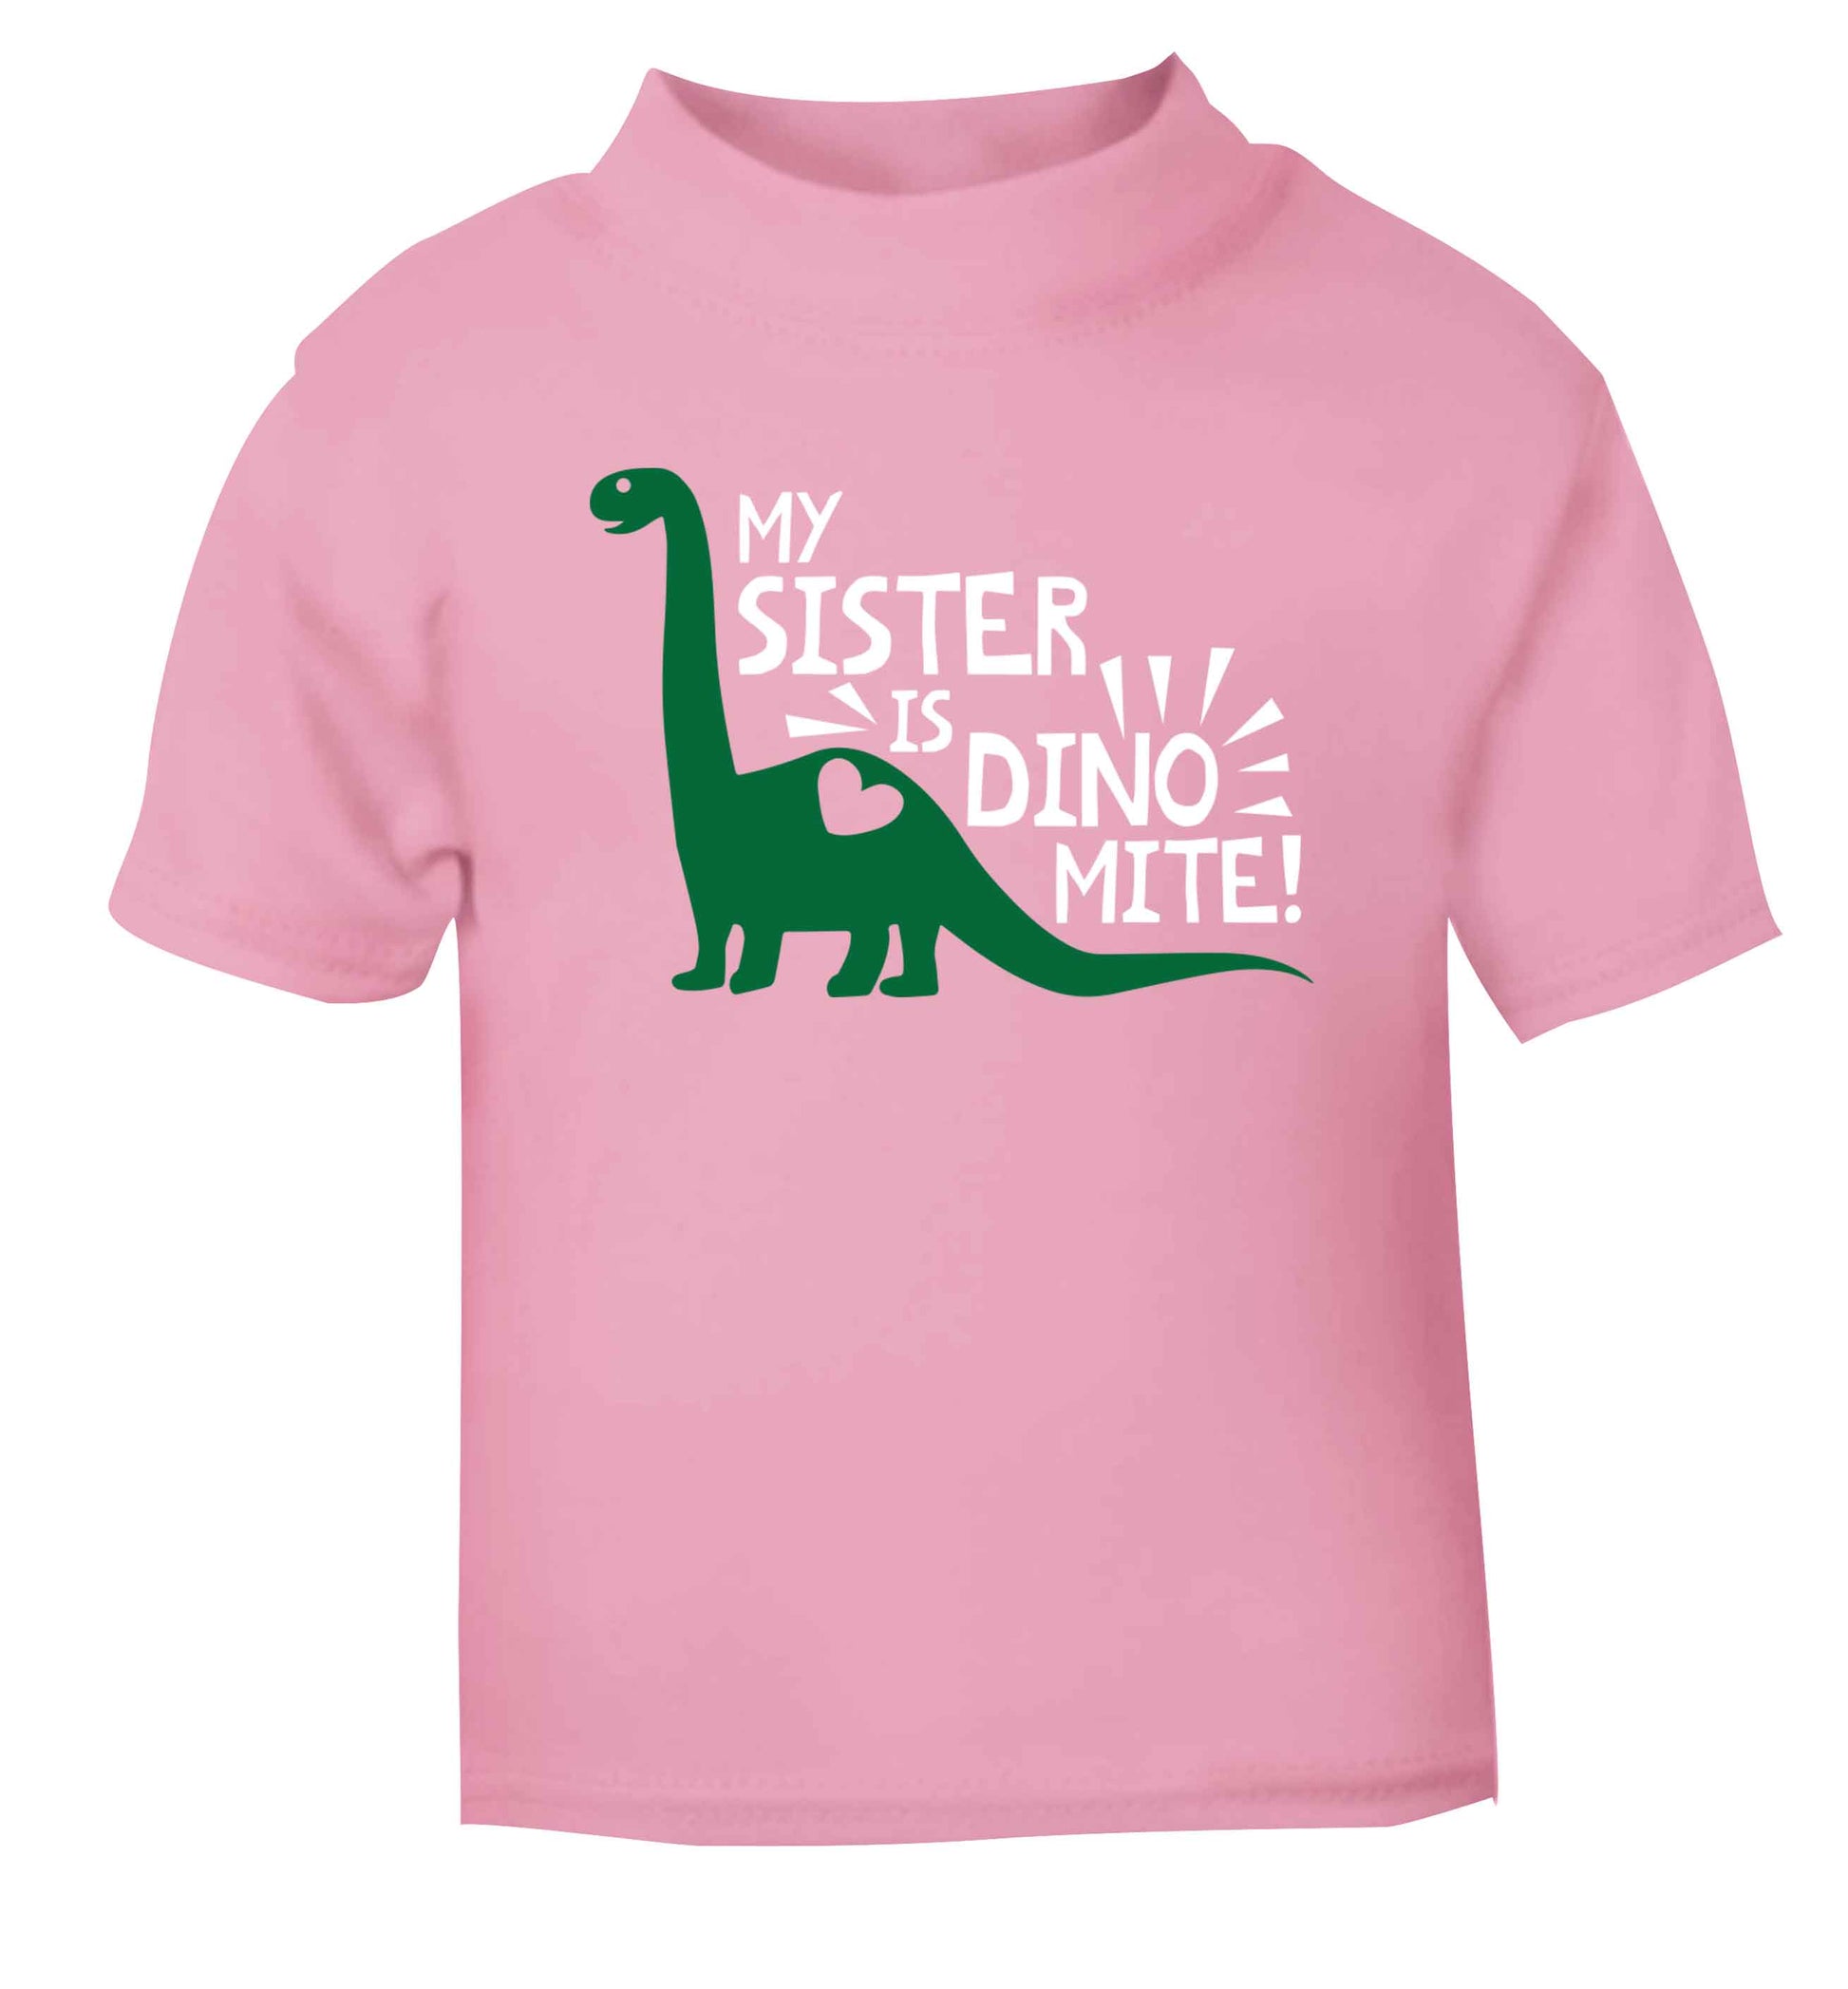 My sister is dinomite! light pink Baby Toddler Tshirt 2 Years